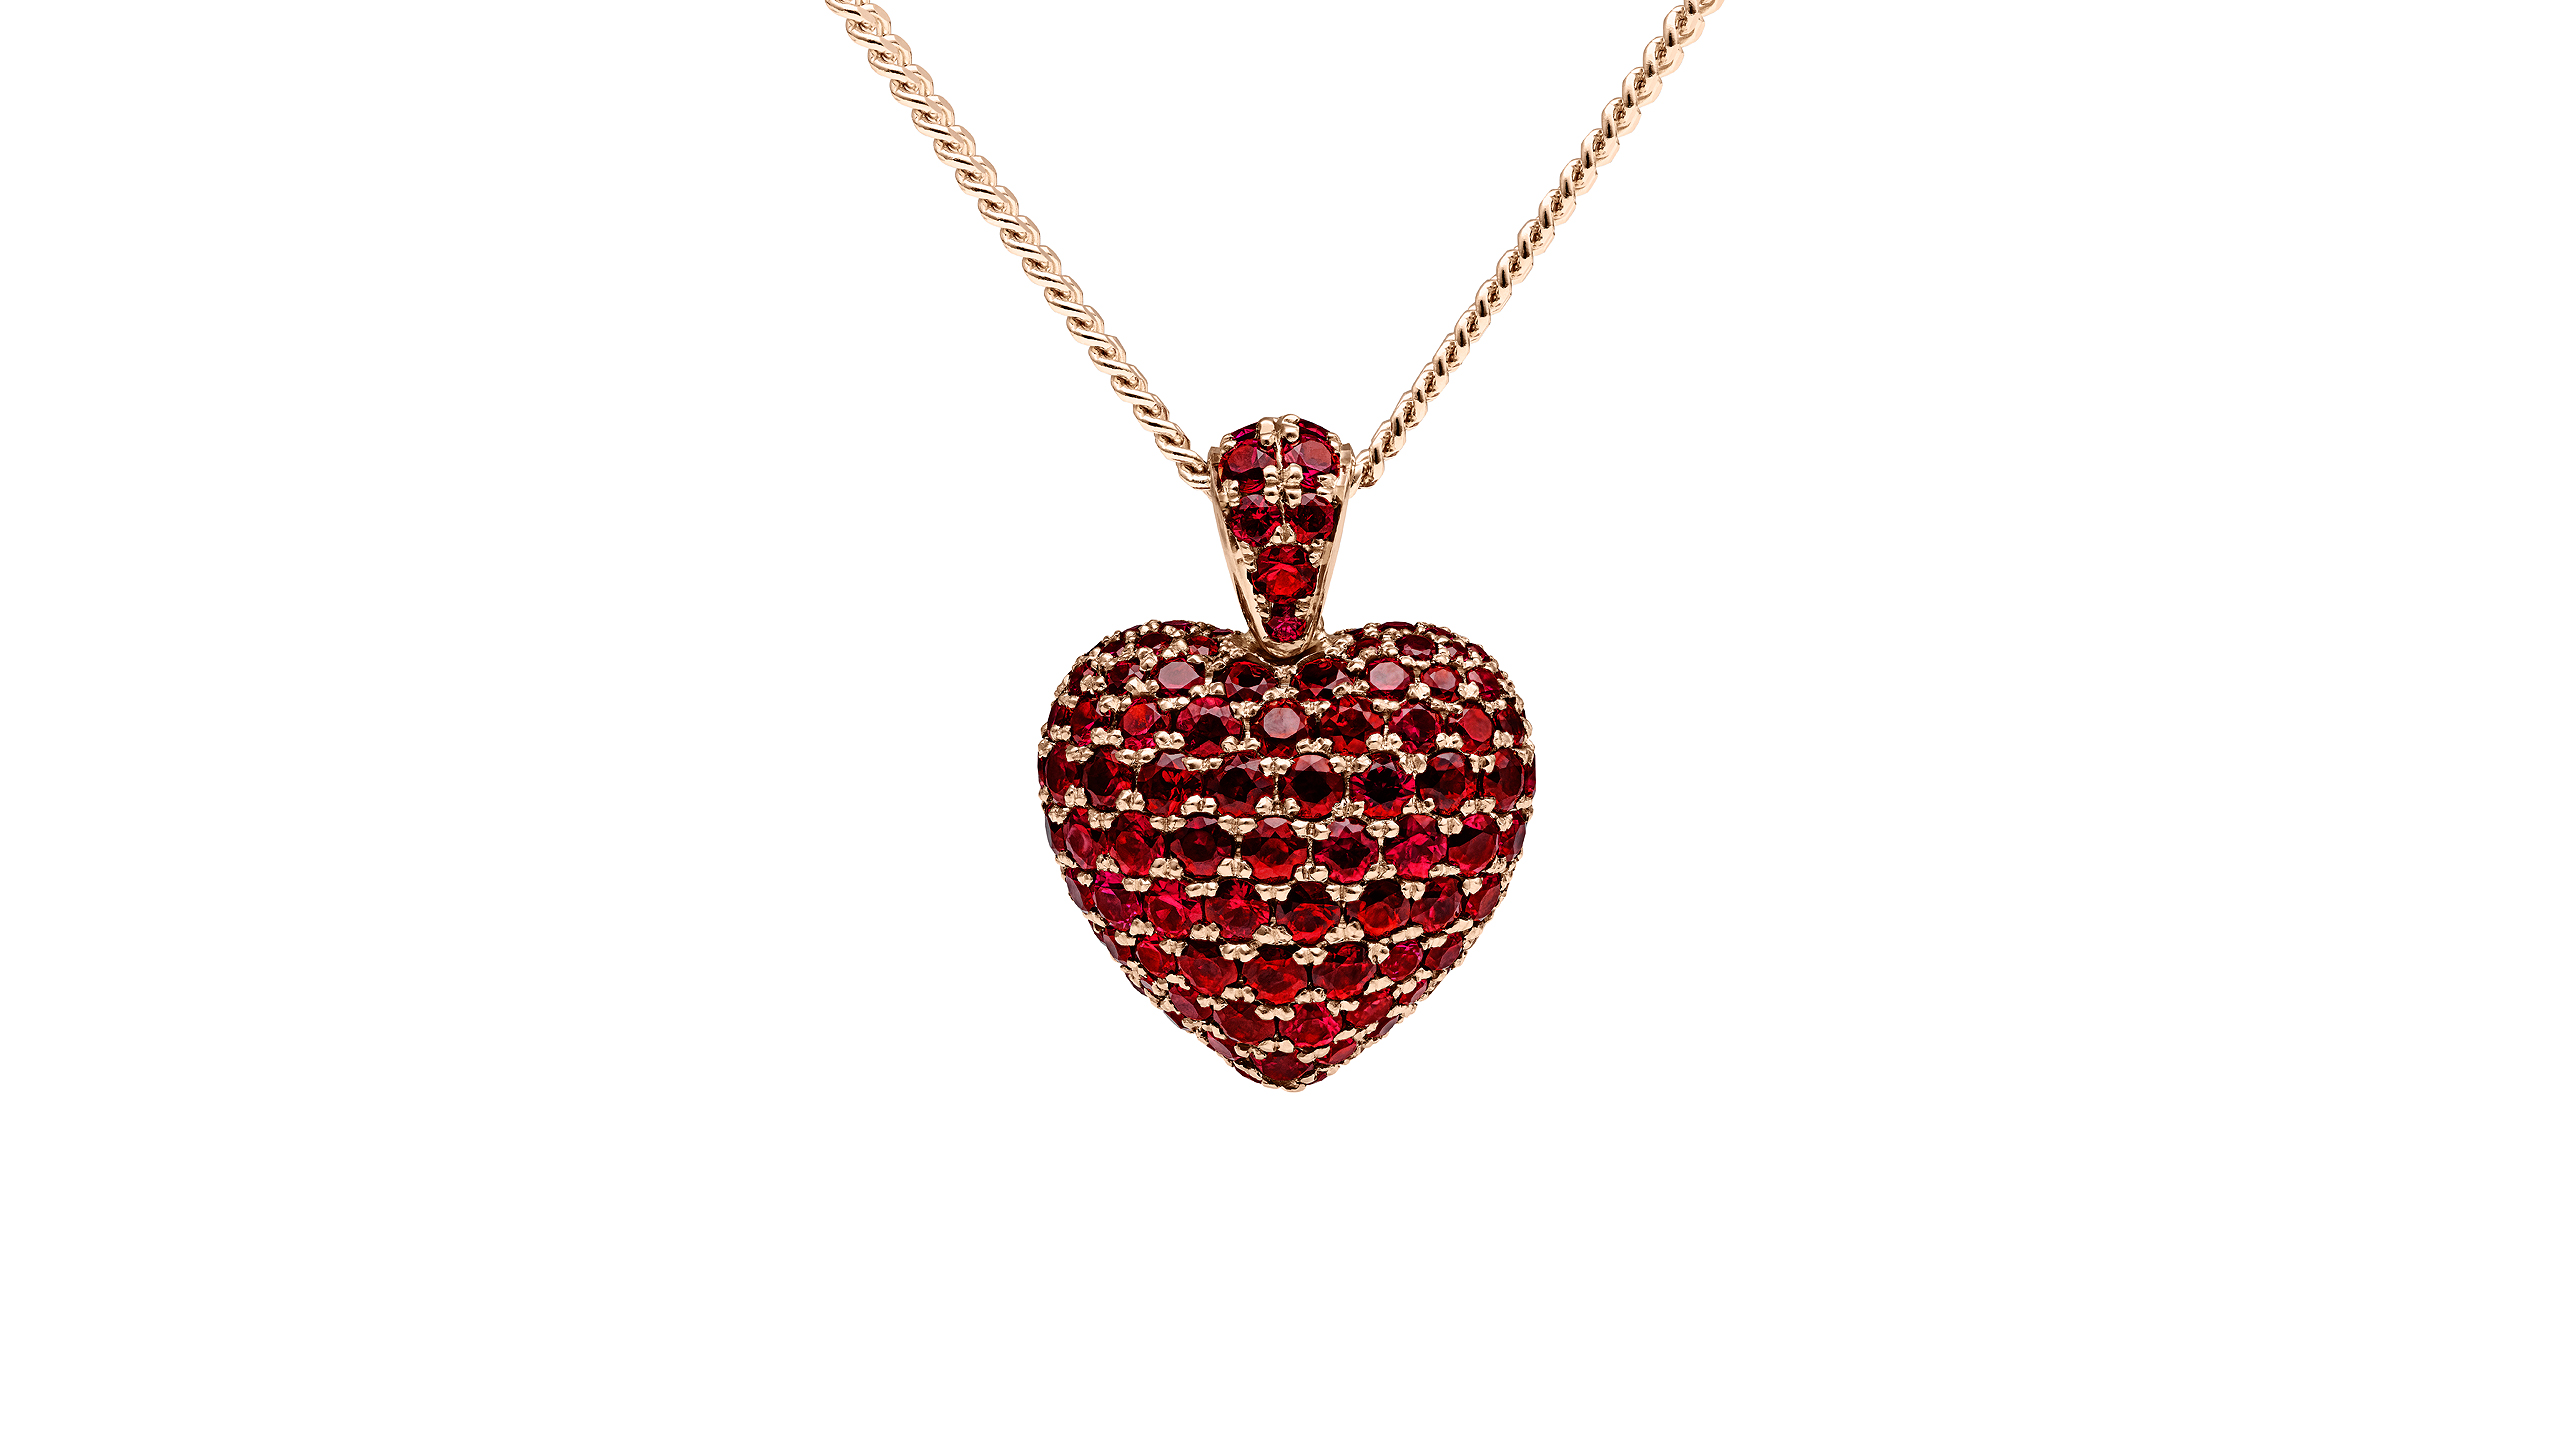 https://towejewels.com/wp-content/uploads/2015/06/Ruby_heart_small_ny_OK_2560x1440_overview_web.jpg